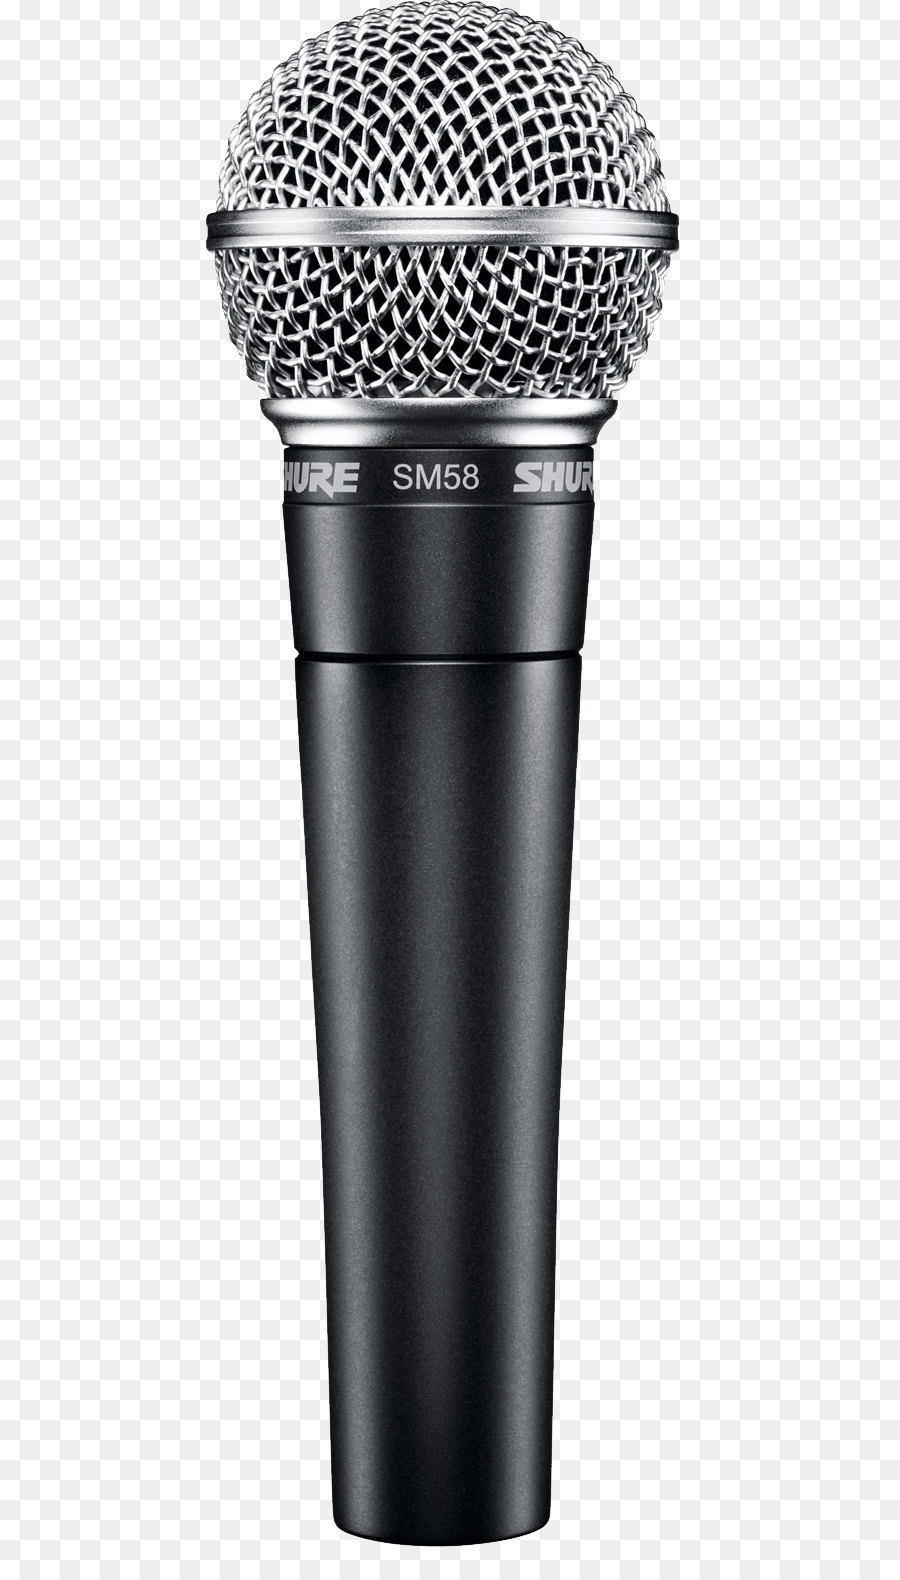 Microphone Shure SM58 Shure SM57 - Microphone PNG image png download - 505*1563 - Free Transparent Microphone png Download.